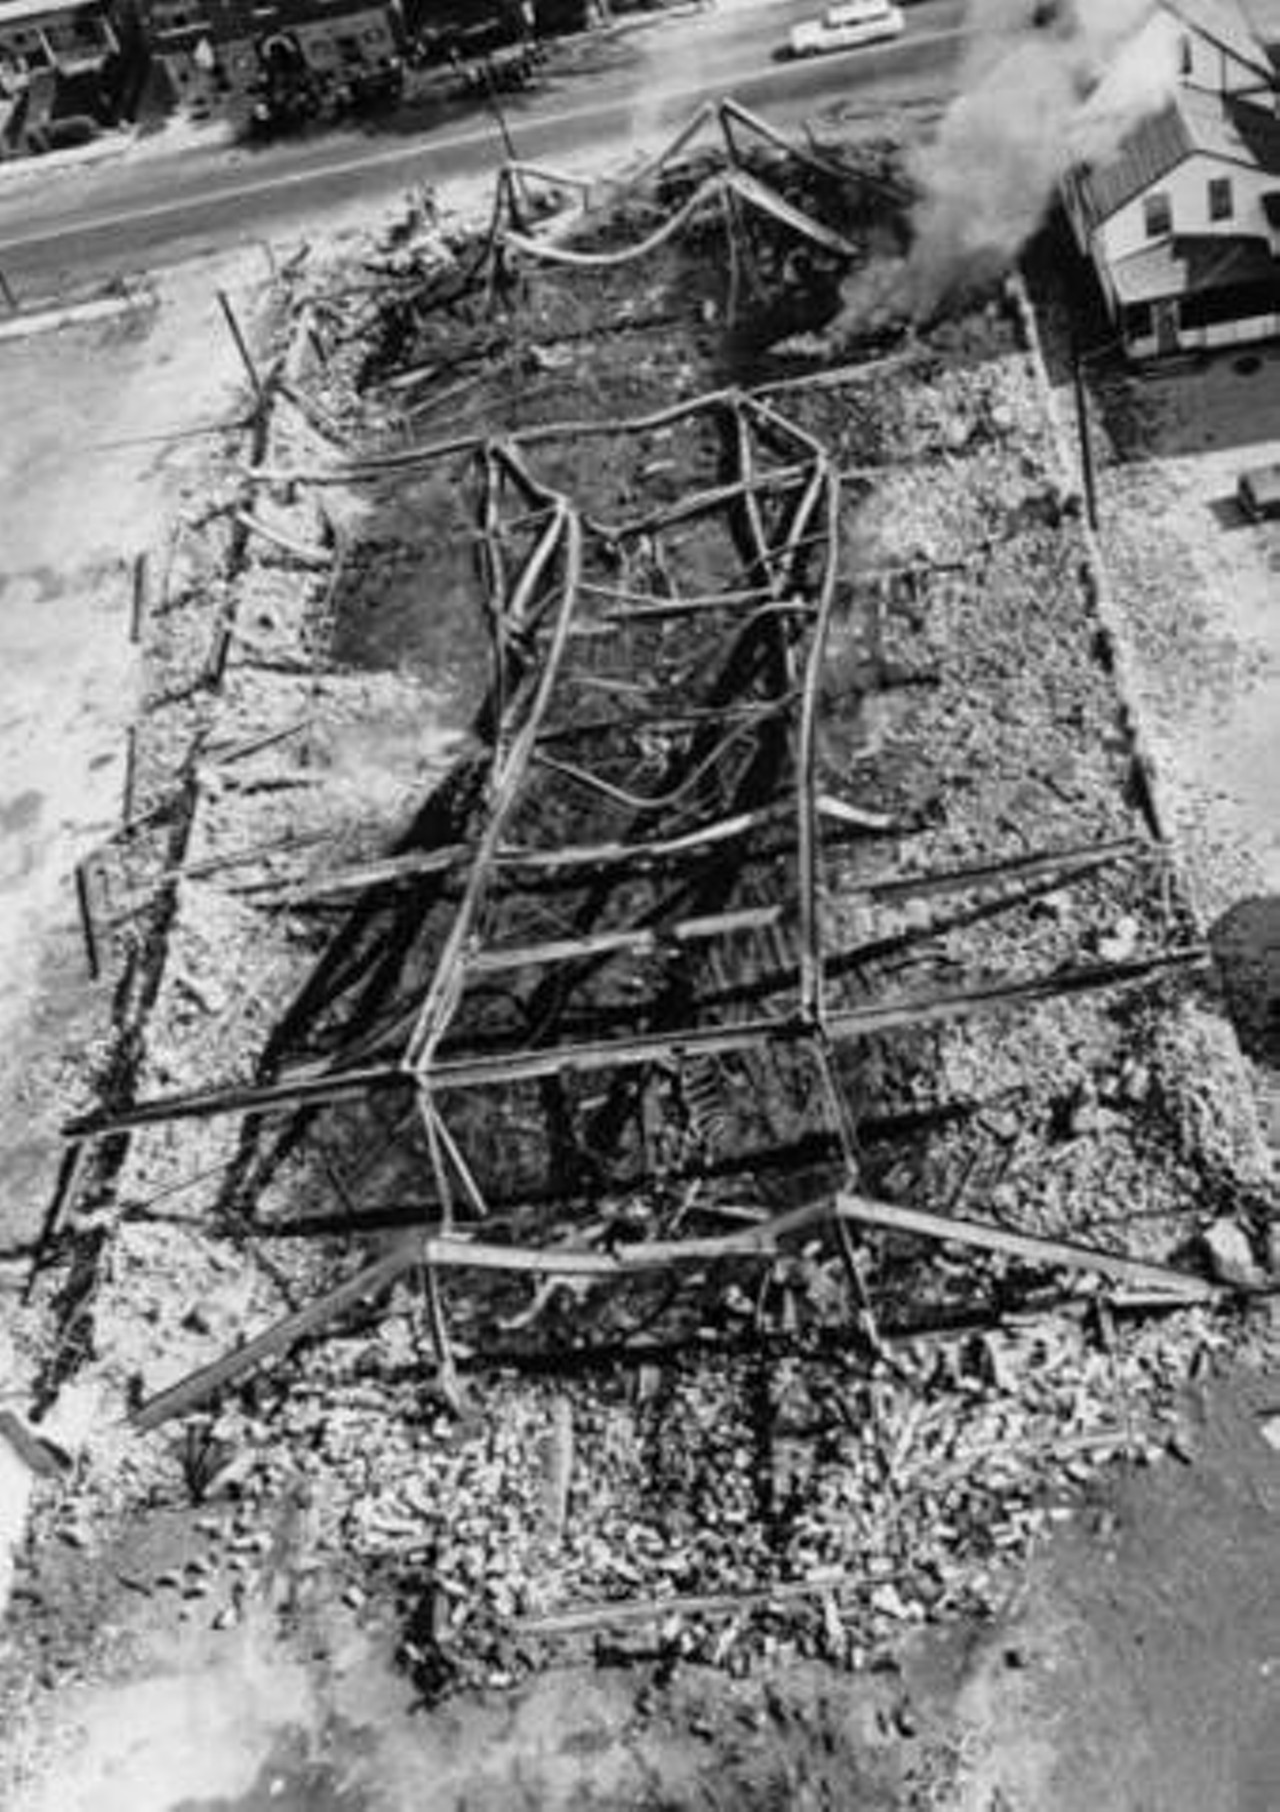 Aerial view of a building destroyed by fire in the 1966 Hough Riots